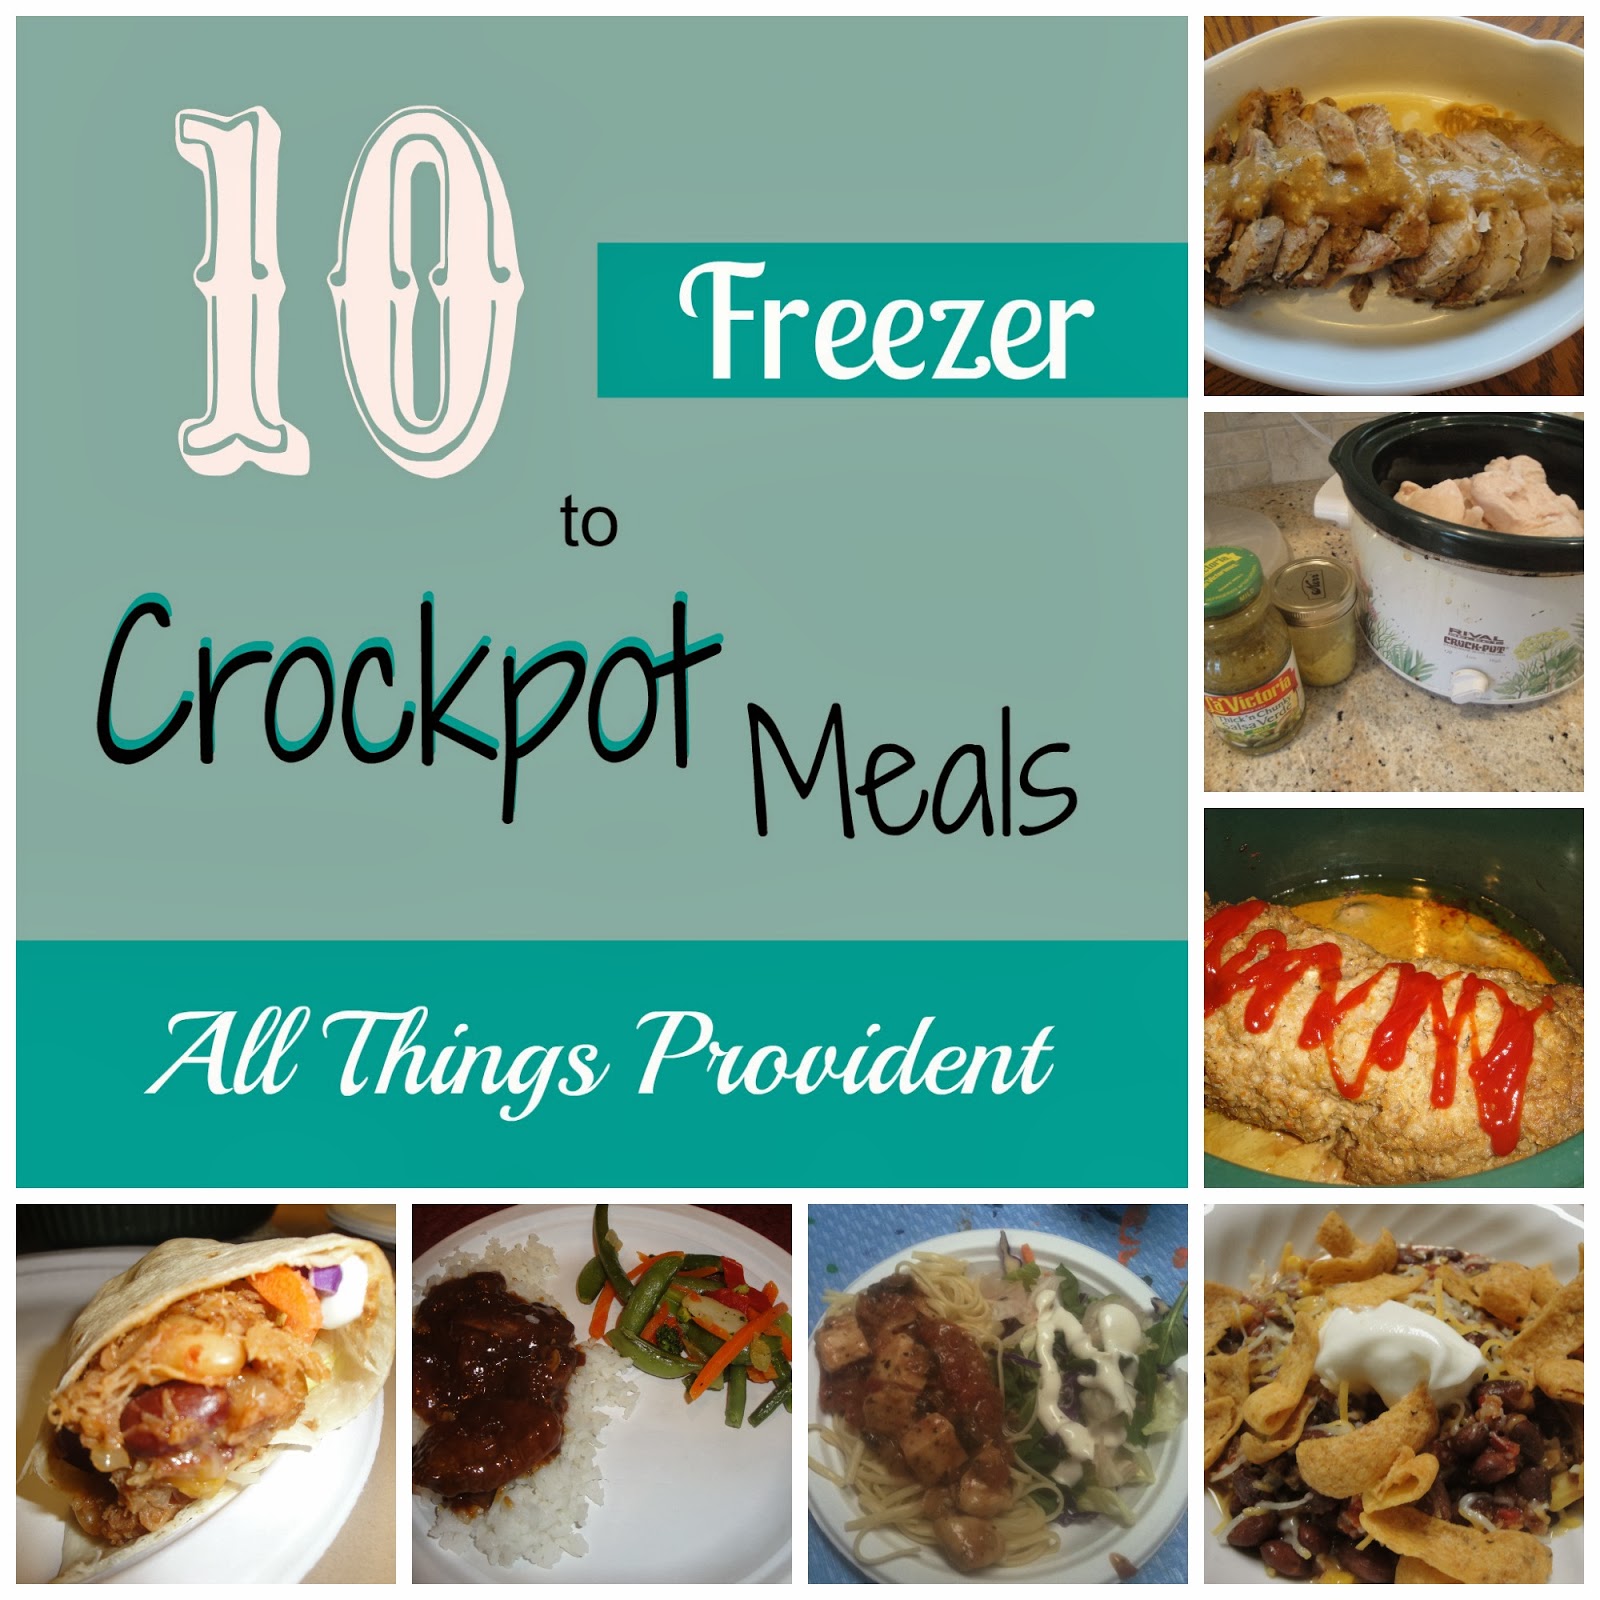 All Things Provident: 10 Freezer to Crockpot Meals